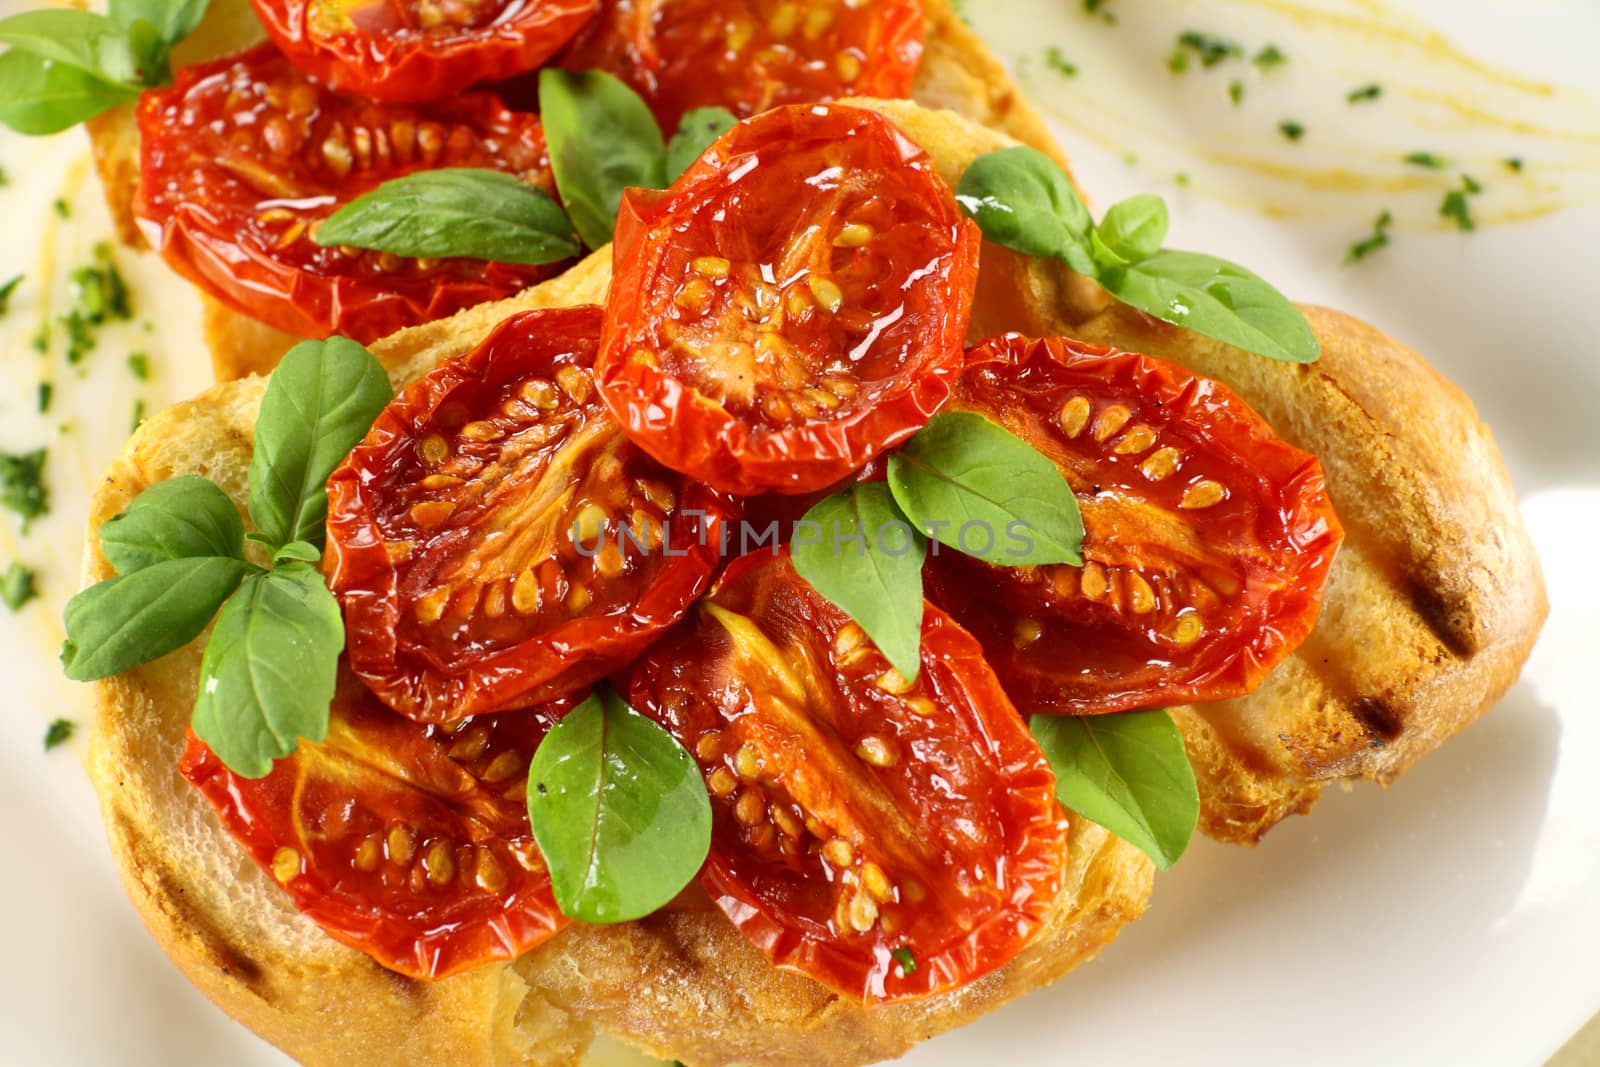 Delicious roasted cherry tomatoes with basil on bruschetta.